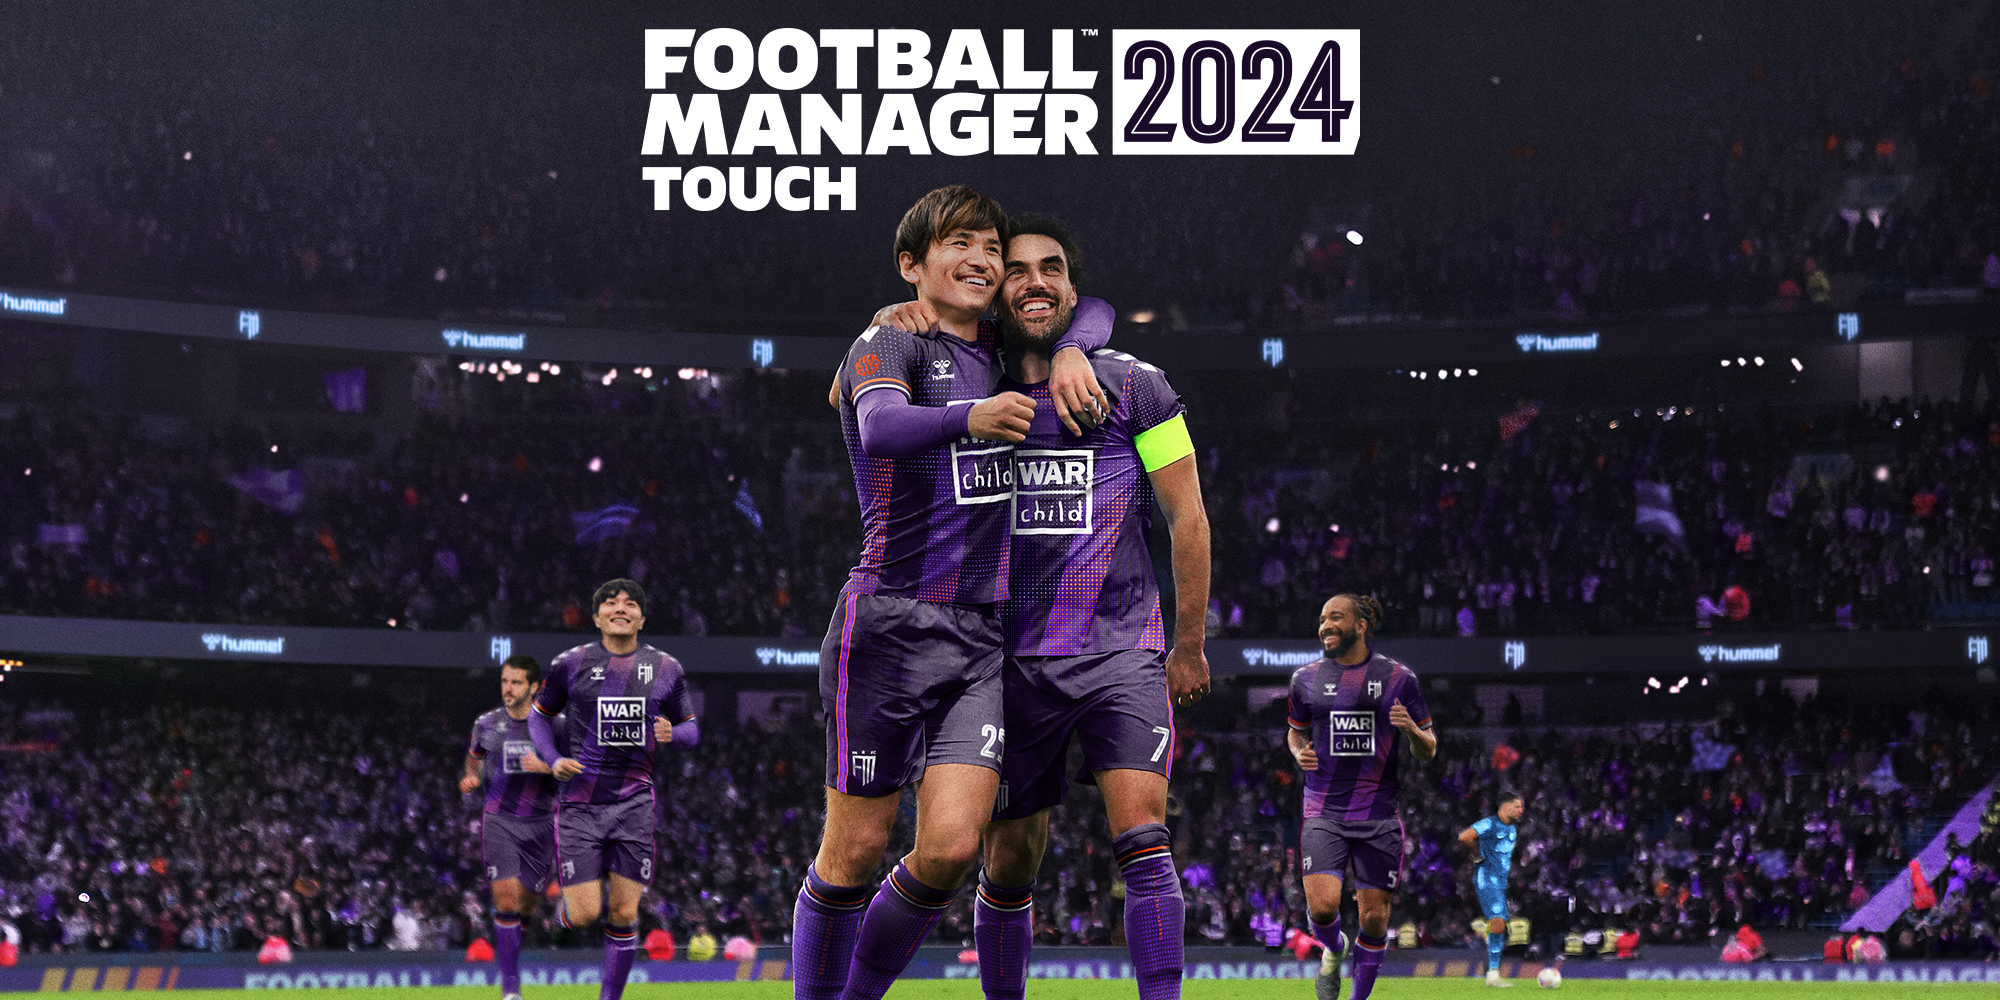 Football Manager 2024 Touch Nintendo Switch Download-Software Spiele Nintendo